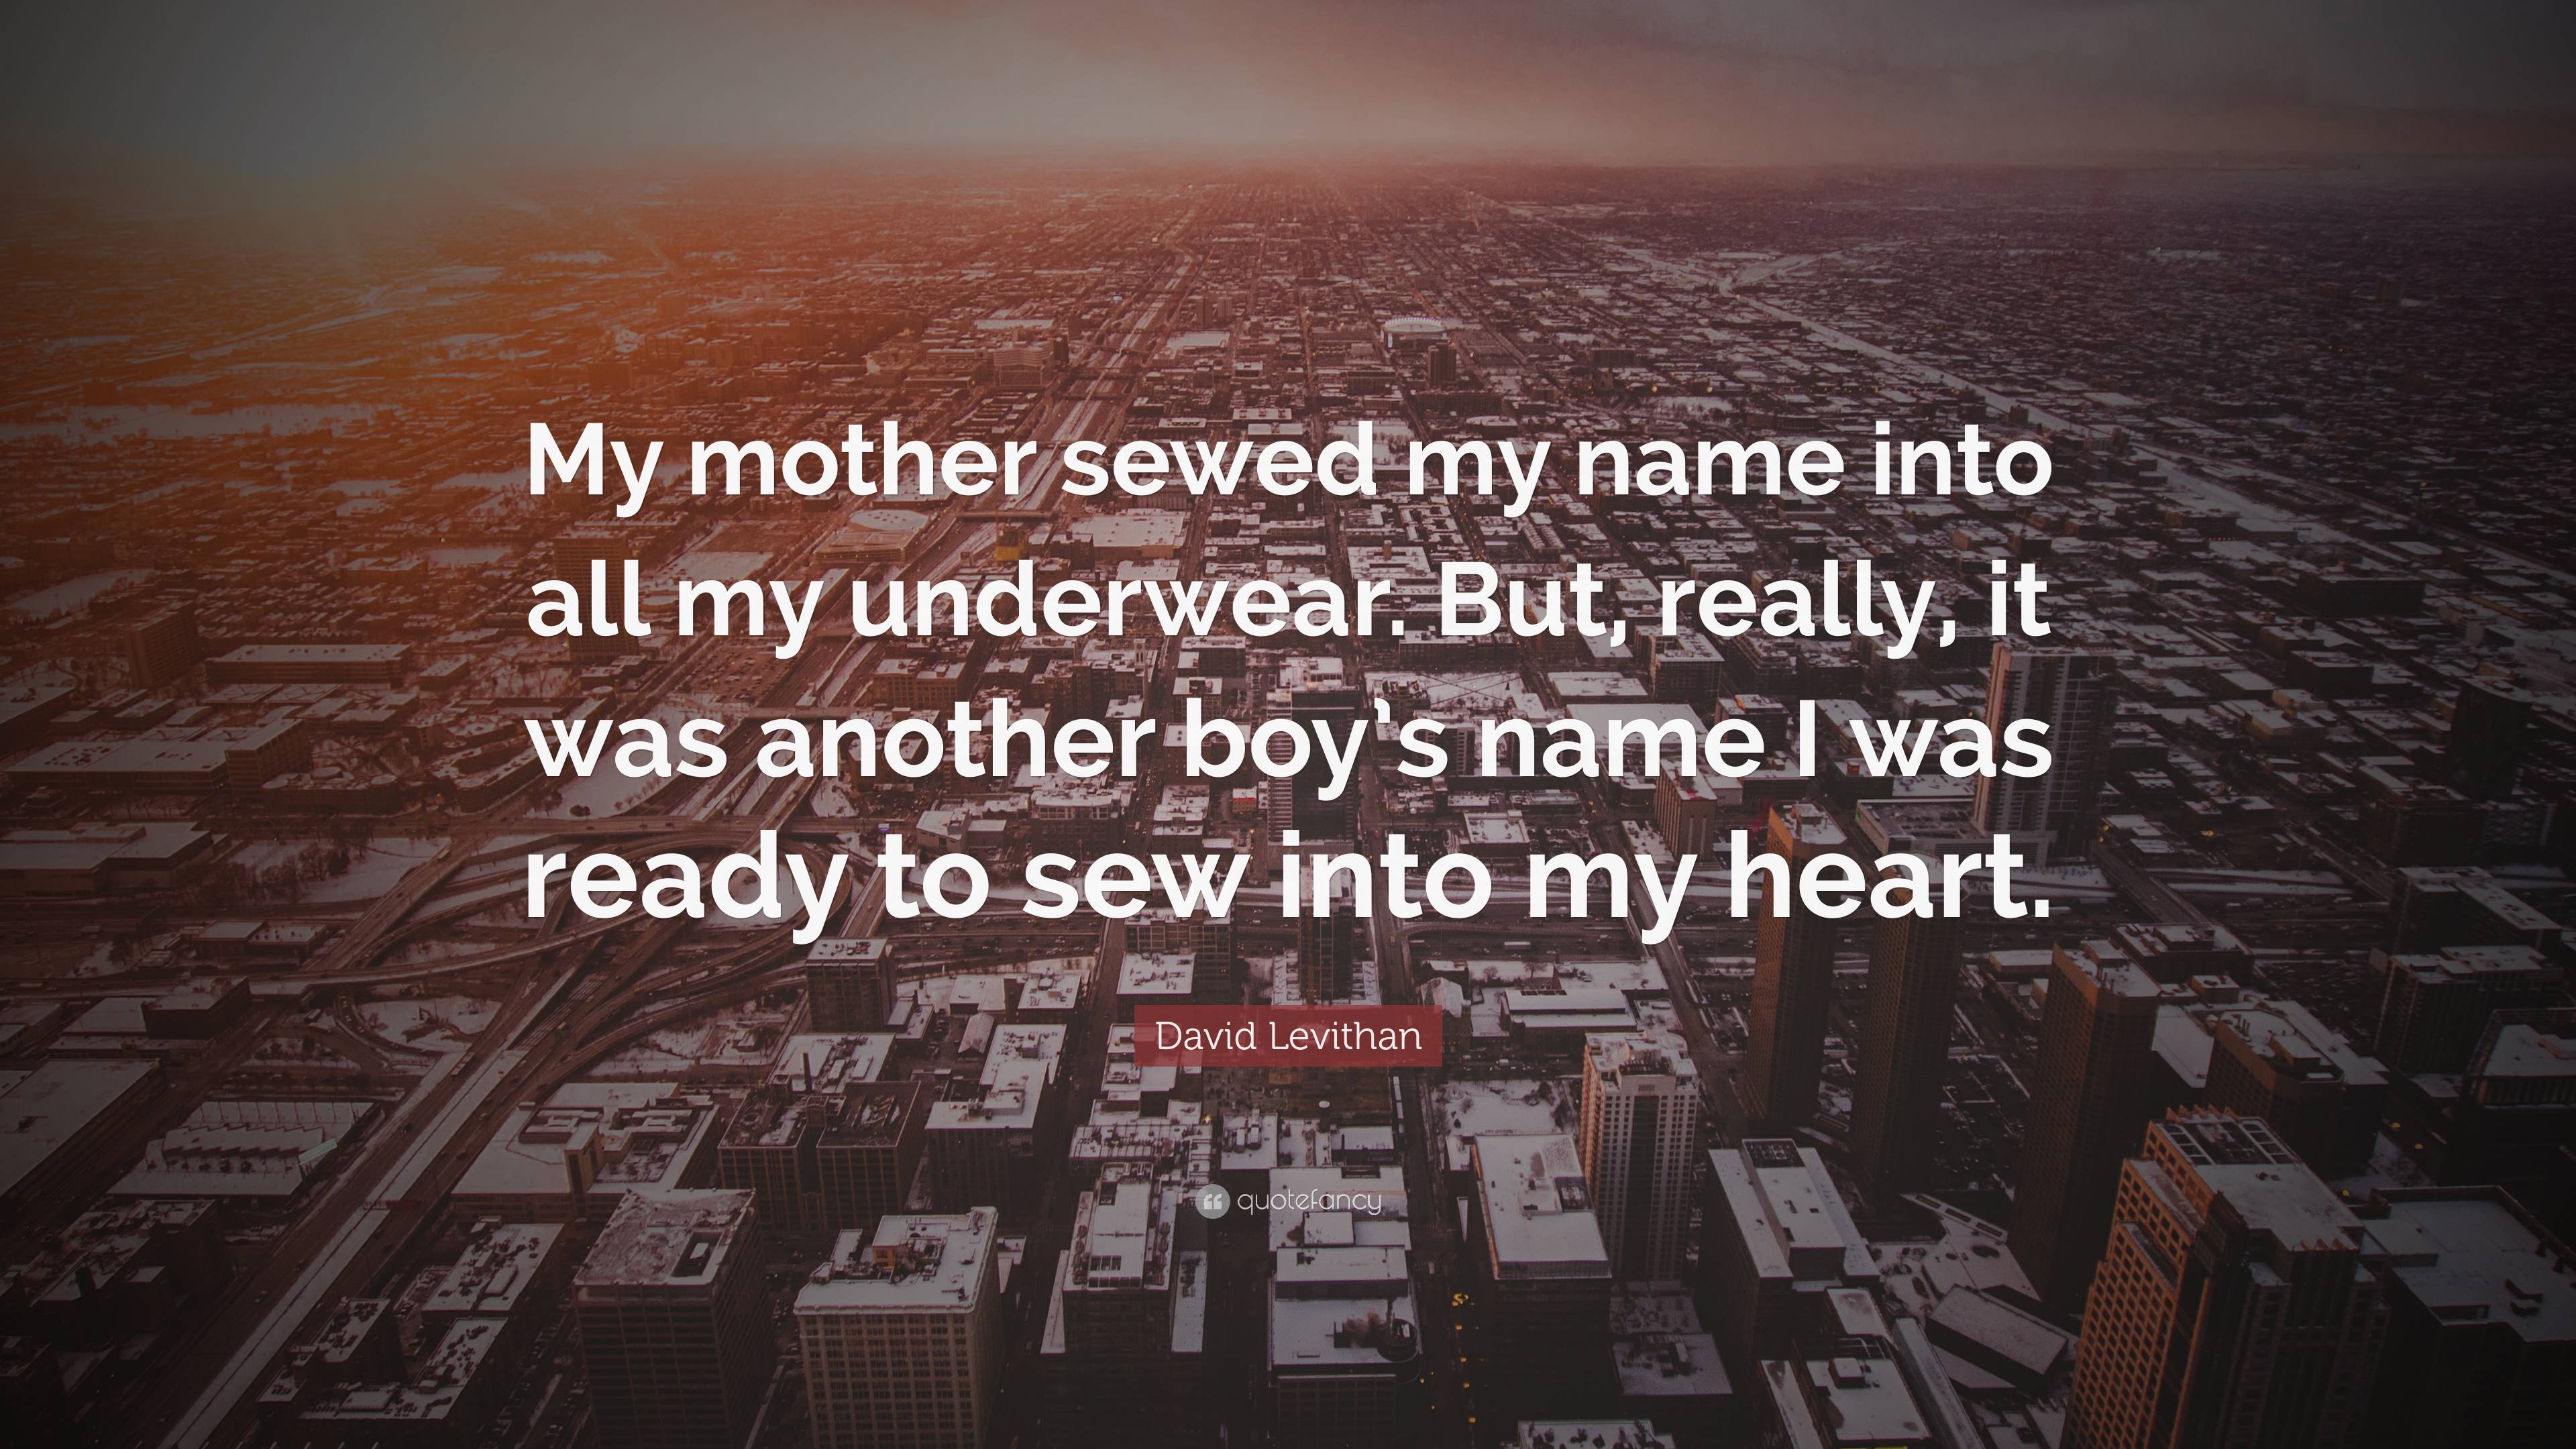 David Levithan Quote: “My mother sewed my name into all my underwear. But,  really, it was